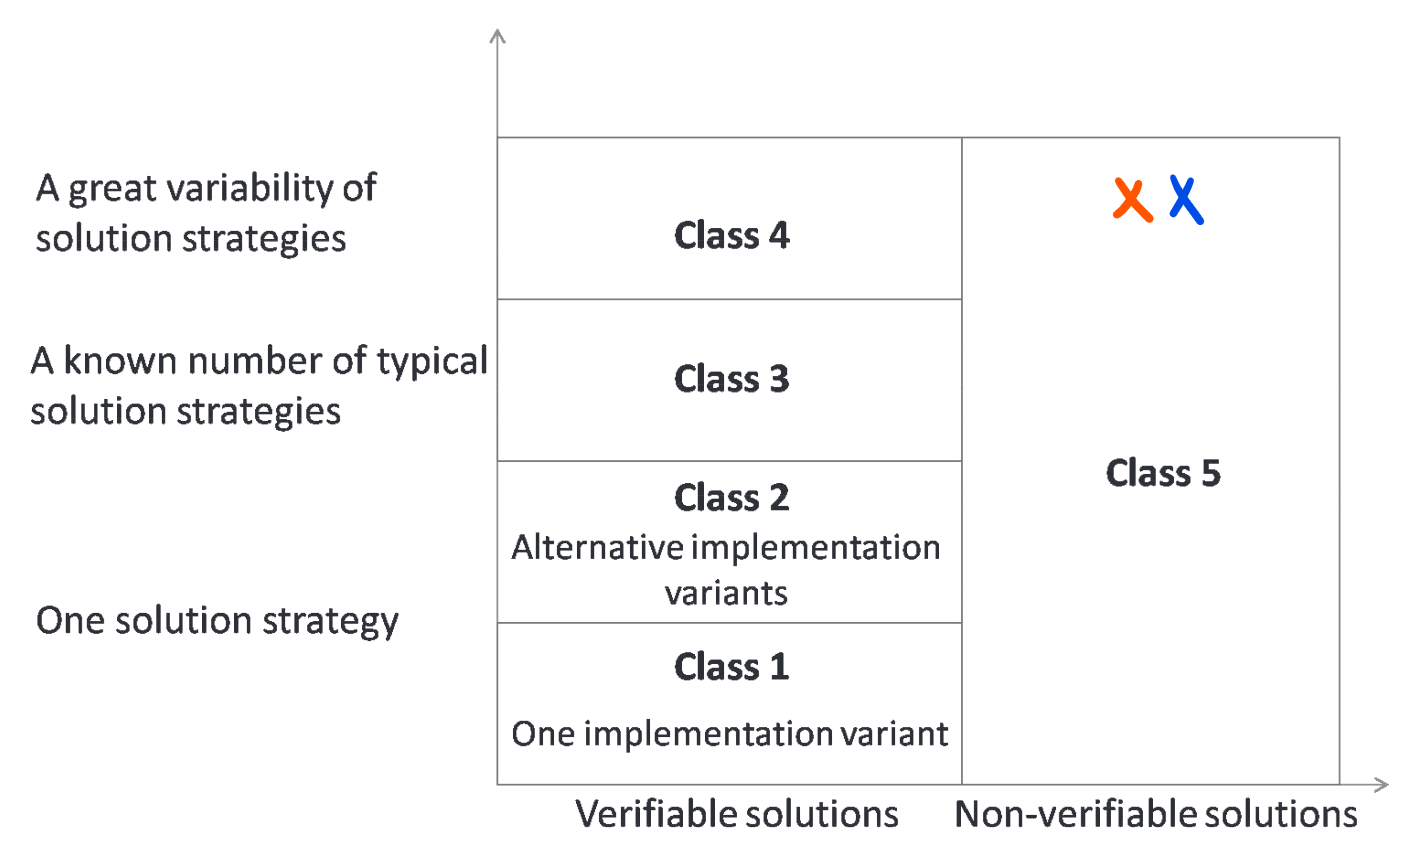 A classification with four rows and two columns. The four rows are labelled, bottom up: one solution strategy, one implementation variant; one solution strategy, alternative implementation variants; a known number of typical solution strategies; and a great variability of solution strategies. The two columns are labelled: verifiable solutions, and non-verifiable solutions. In the left column, the four rows represent class 1 to 4, from bottom to top. In the right column, a single class (class 5) spans all four rows. Two marks are placed in class 5, at the top of the image.